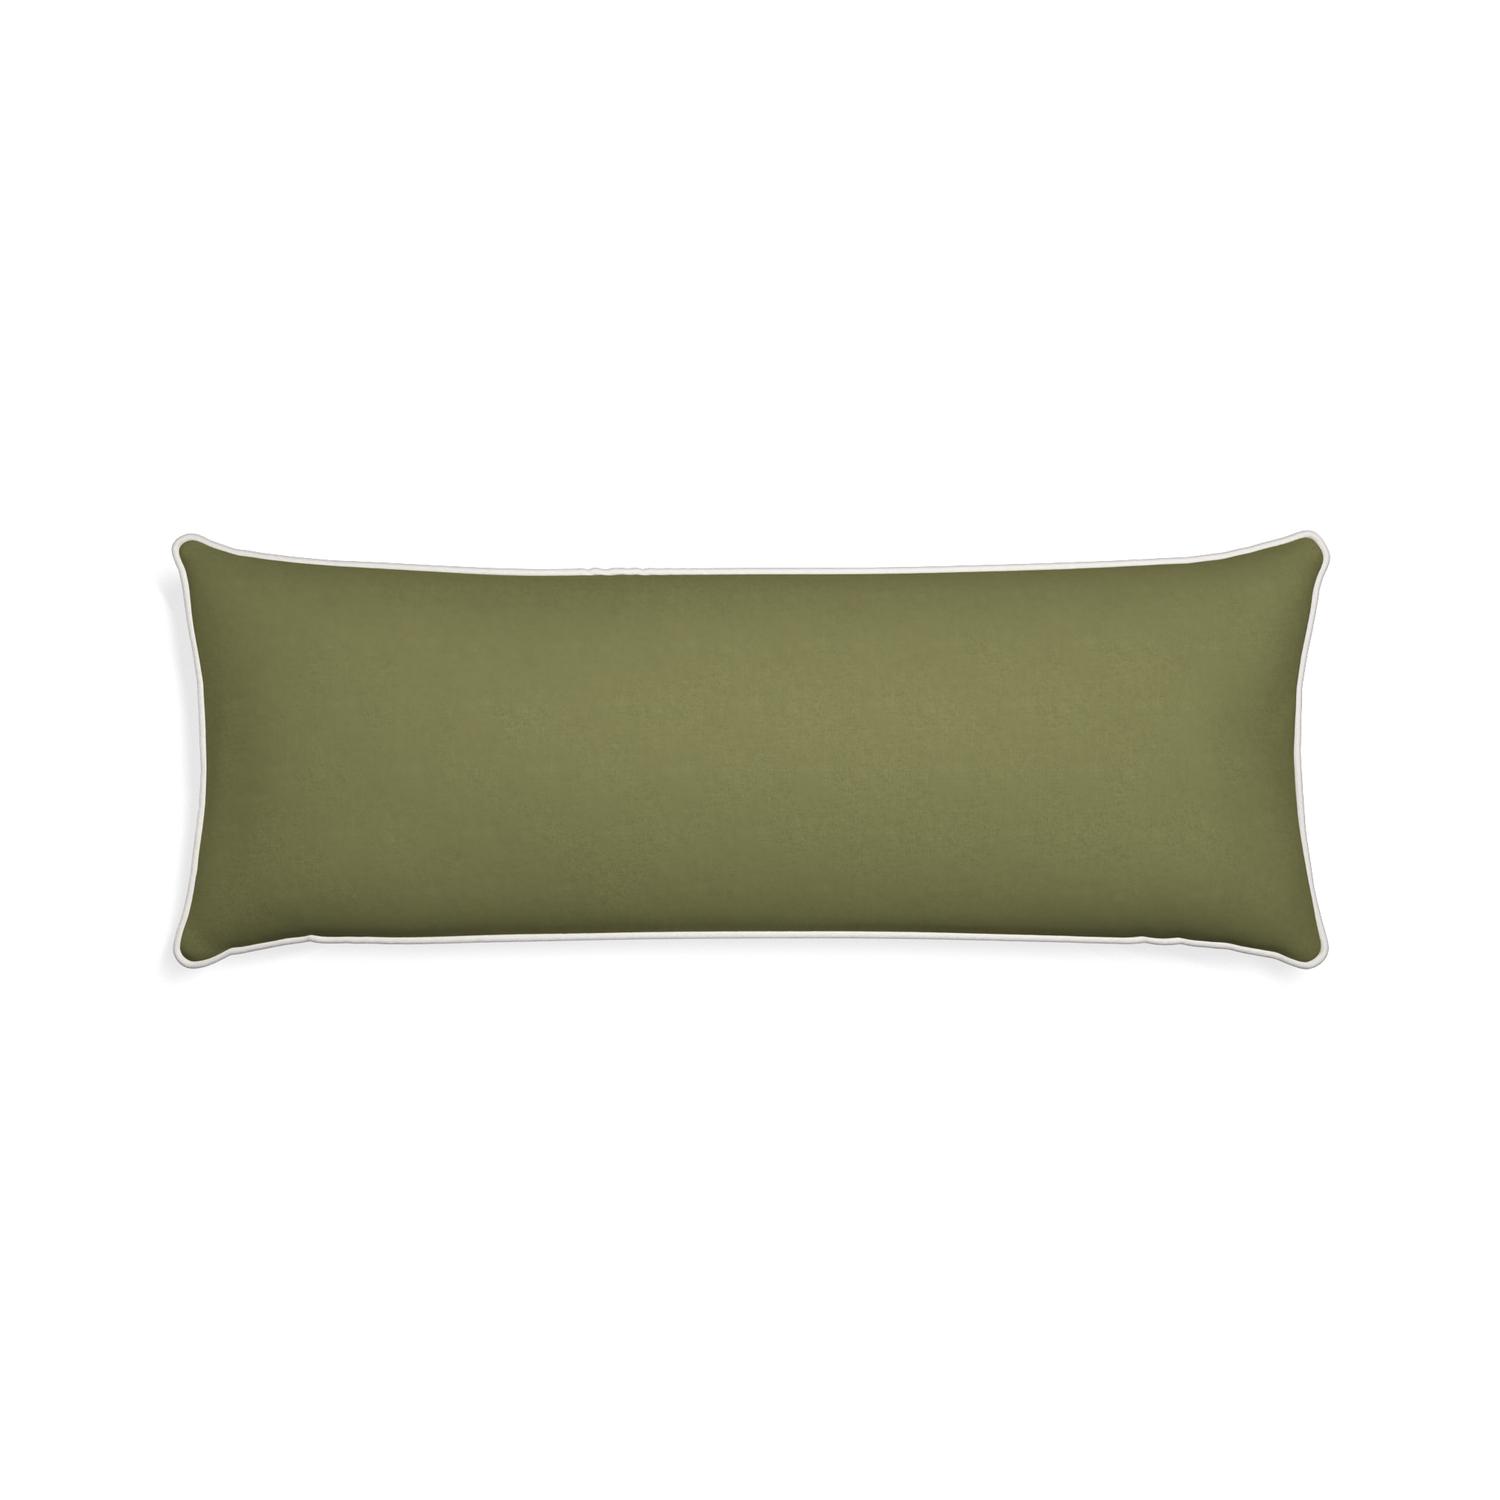 Xl-lumbar moss custom moss greenpillow with snow piping on white background